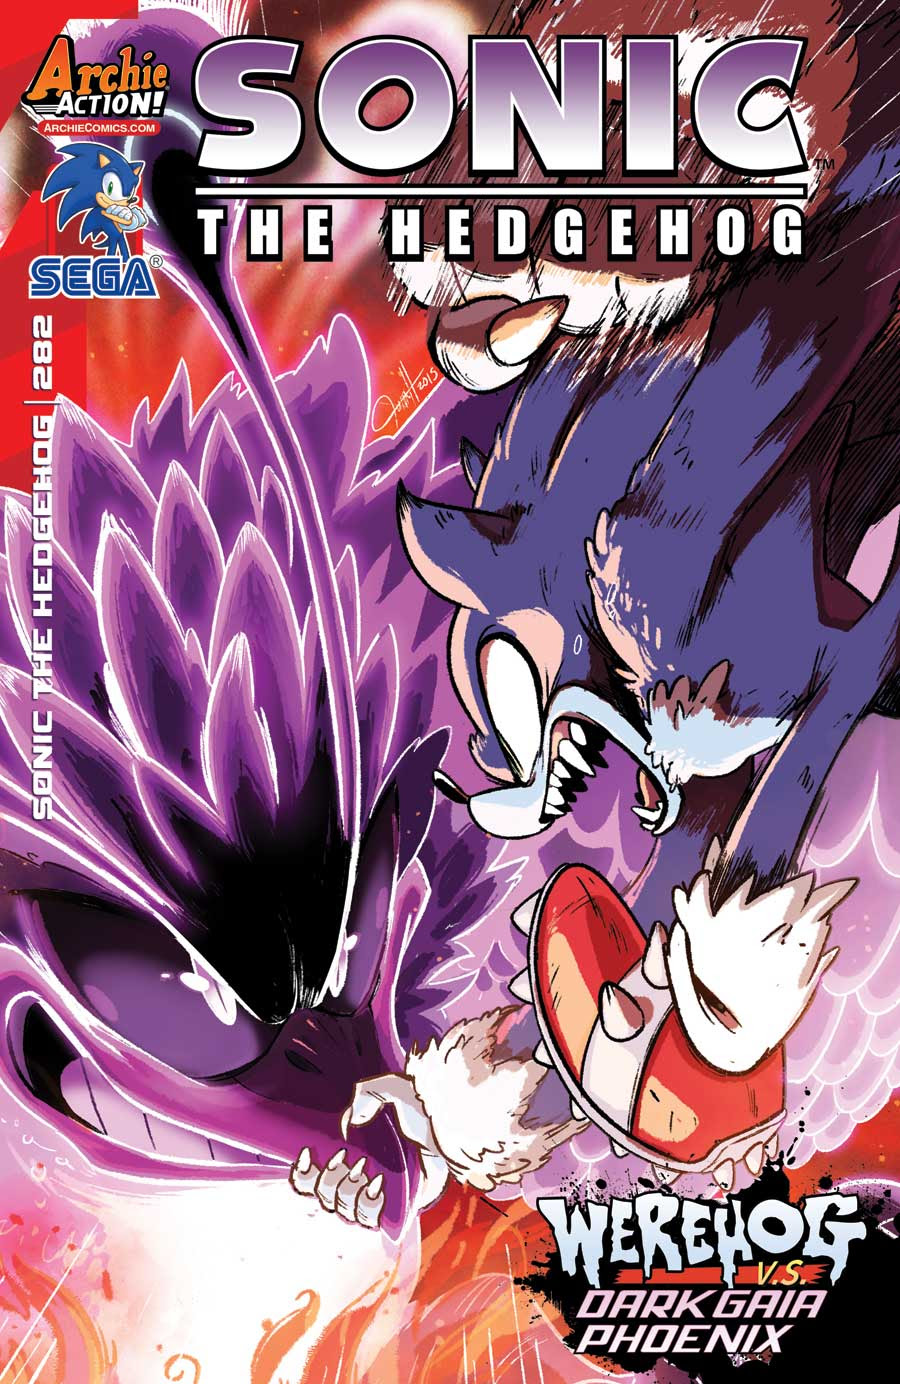 Sonic the Hedgehog #283 Cover by Tyson Hesse